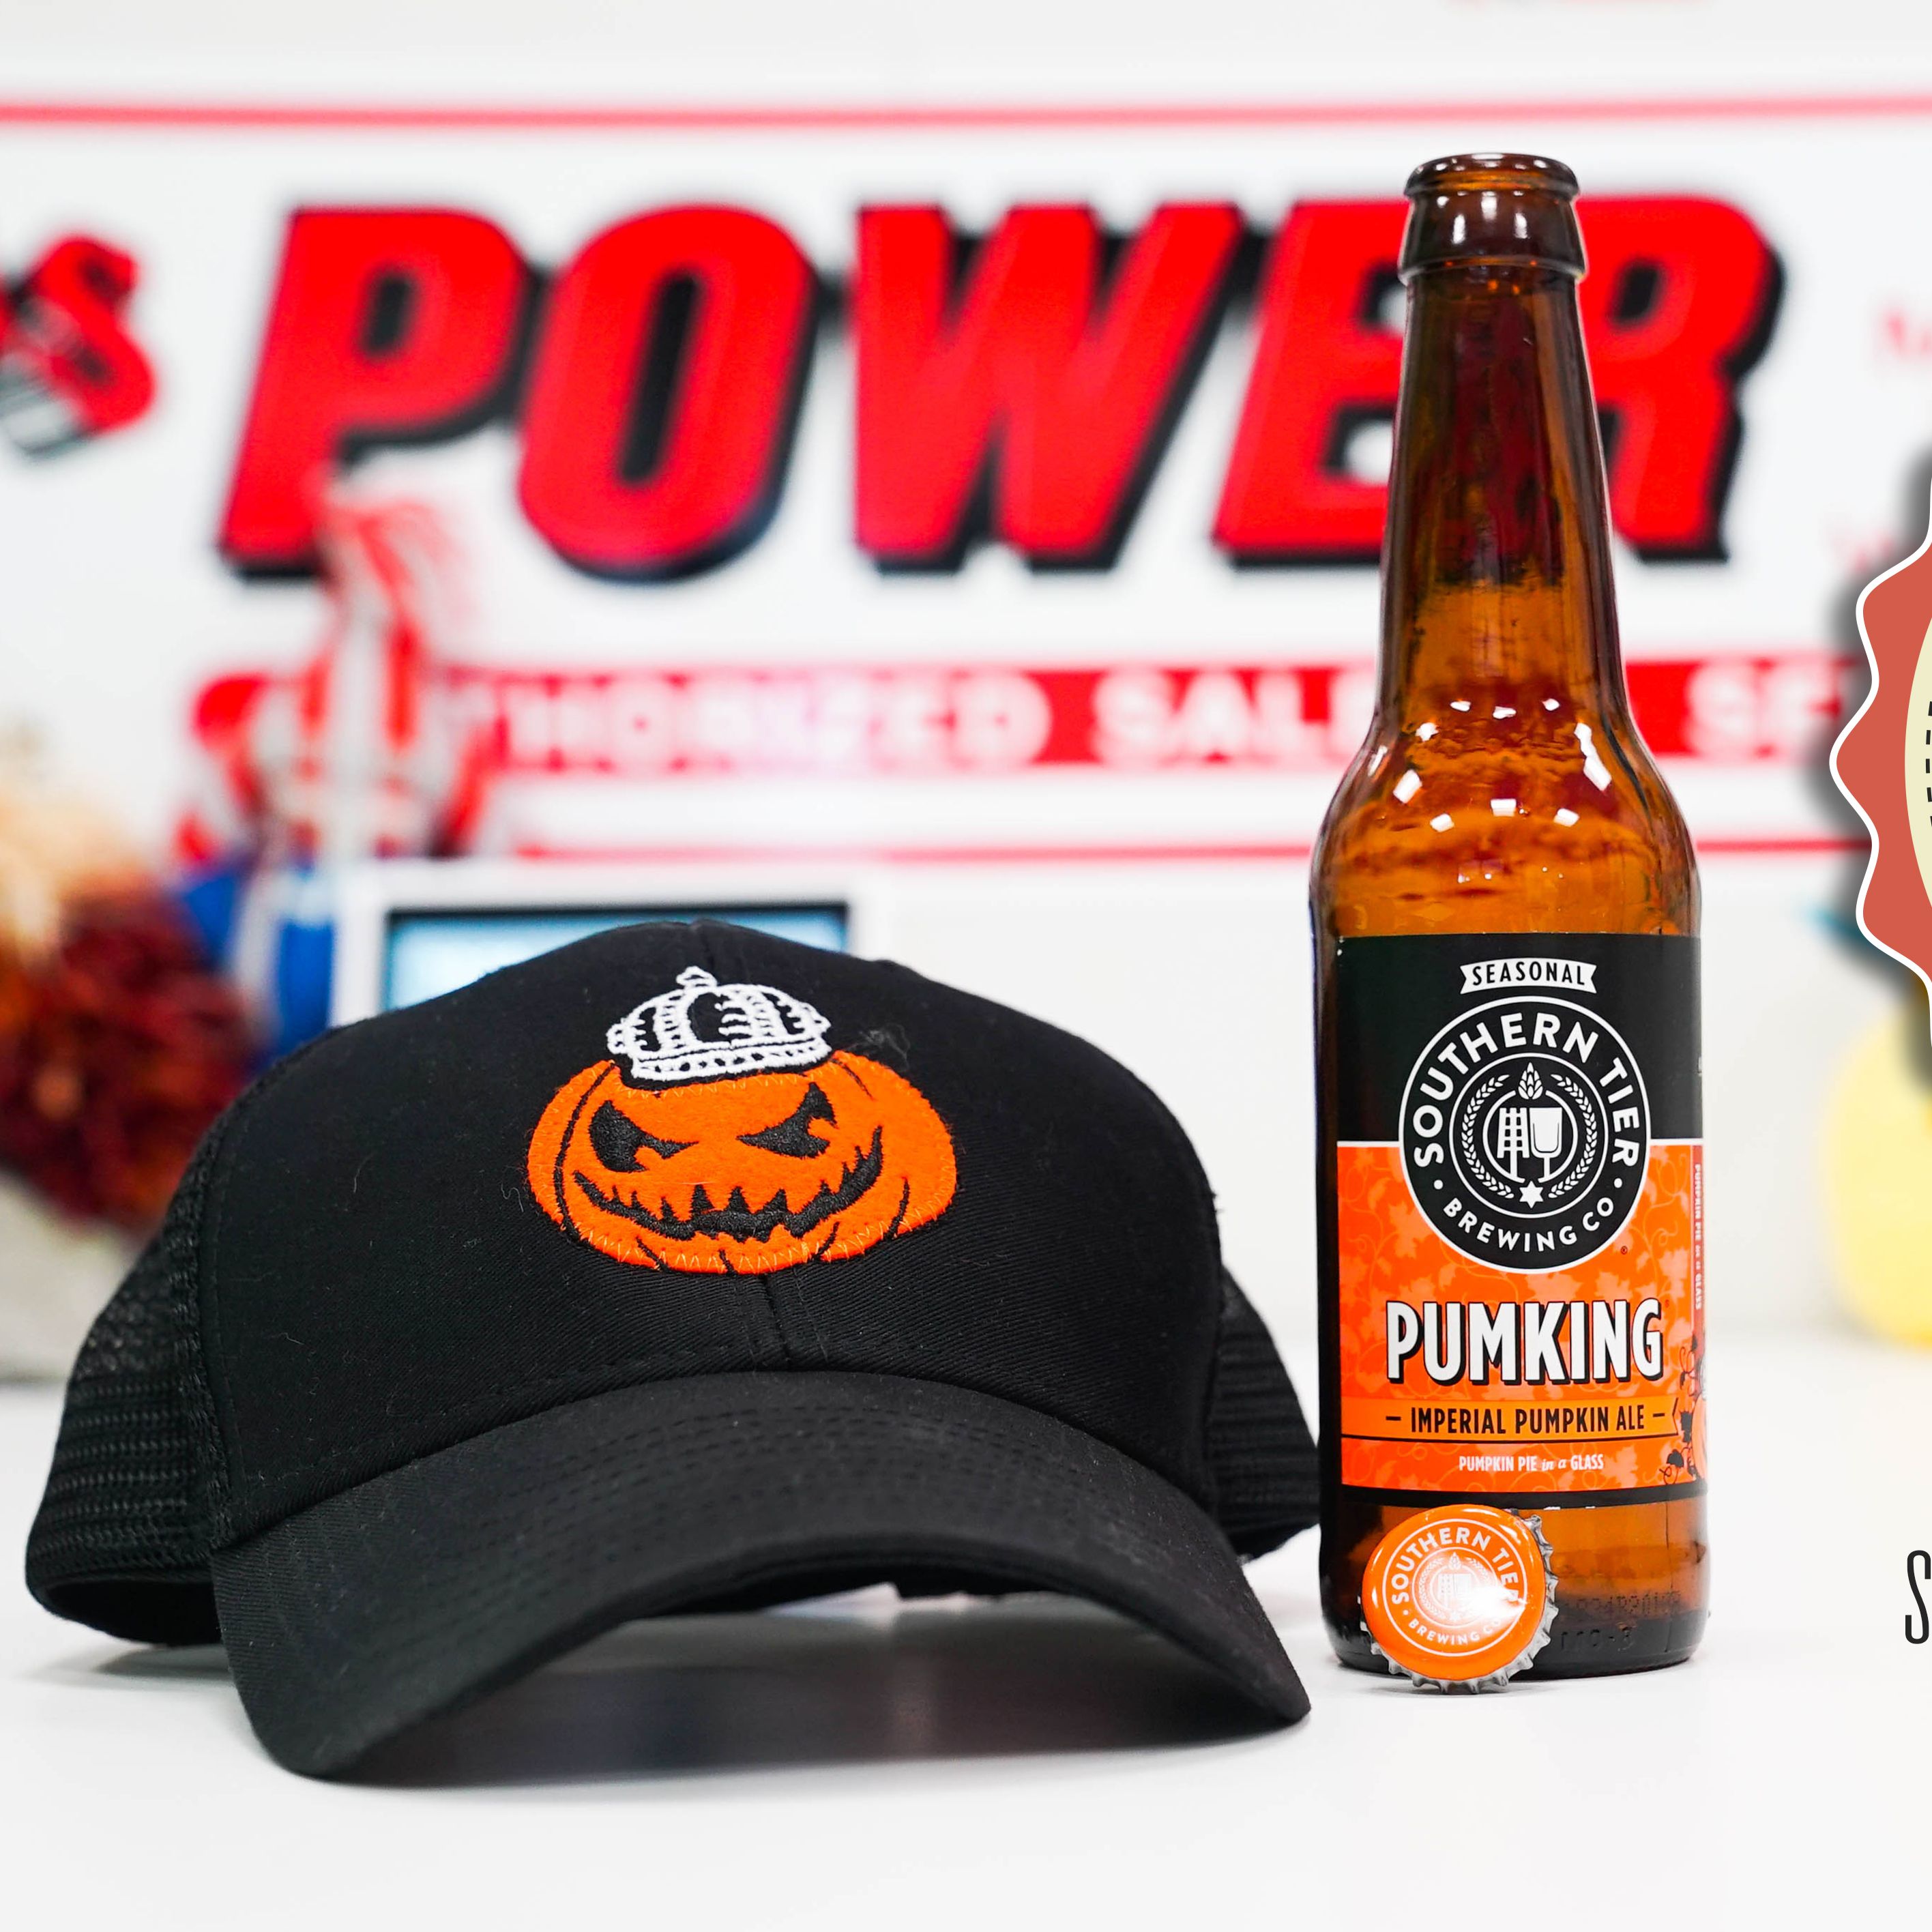 A Beer with Atlas #5 - Southern Tier Pumking